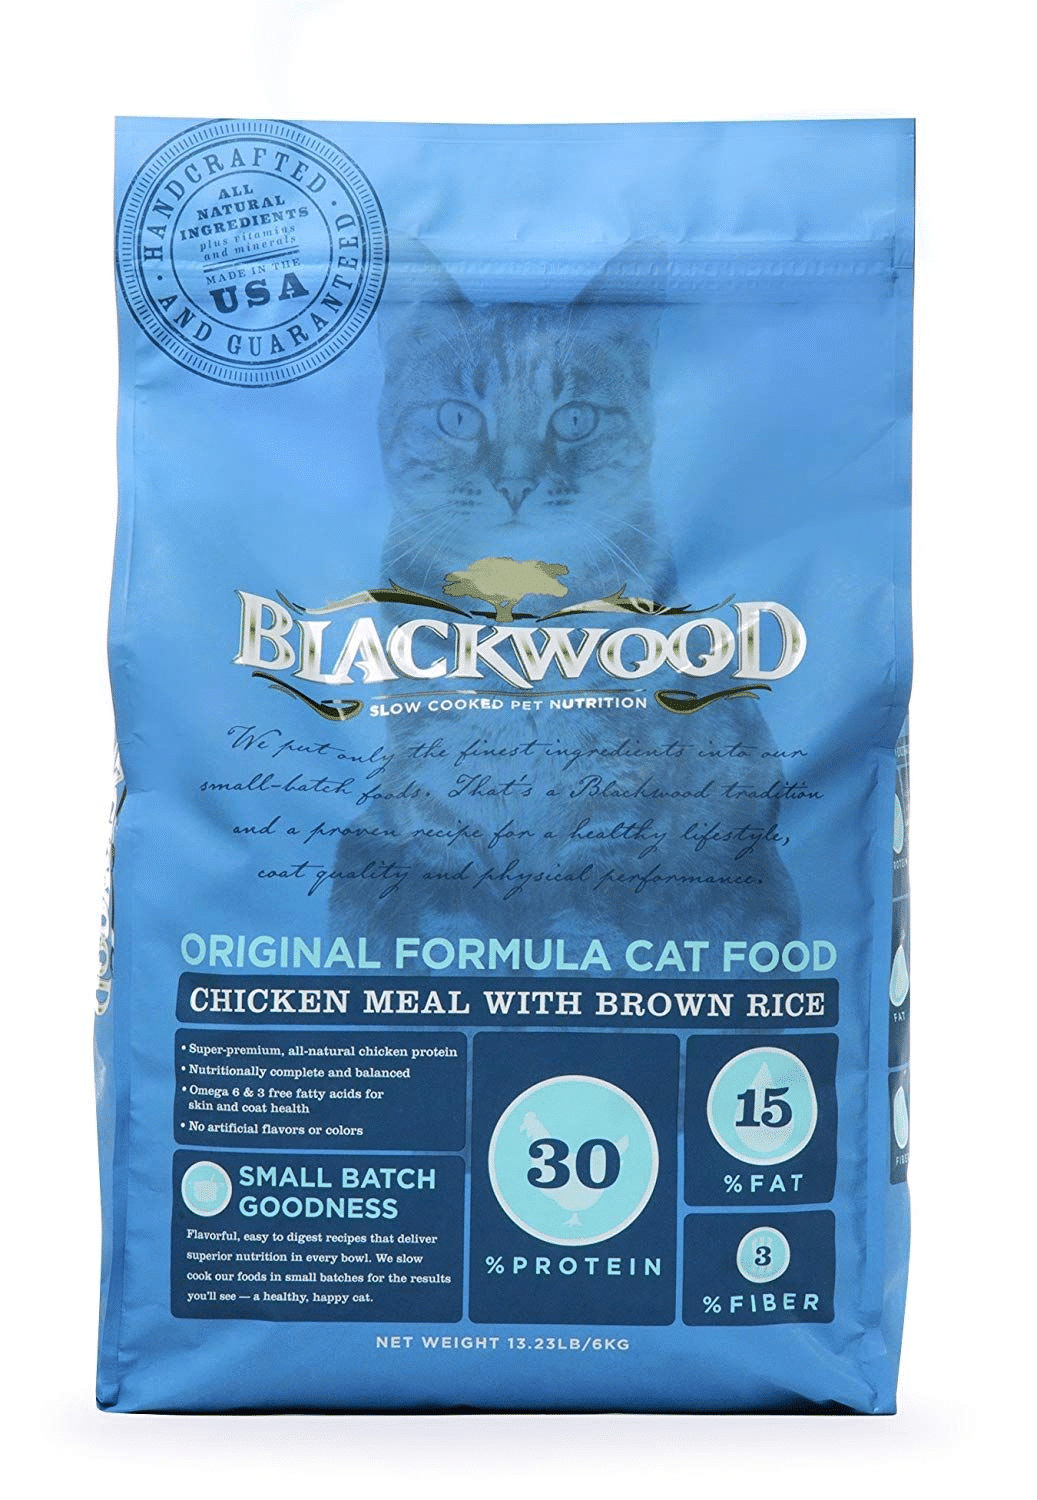 Most healthy formula dry cat food in malaysia is Blackwood Original Formula Chicken Meal With Brown Rice. good for American Shorthair,best cat food for indoor cats, What are the top 5 healthiest cat foods?,What cat food do vets recommend?,Is wet or dry food better for cats?,Do indoor cats need a special diet?,Do indoor cats need different food?,Can cat food go bad?, best dry cat food for senior cats, 
best cat food for indoor cats with sensitive stomachs